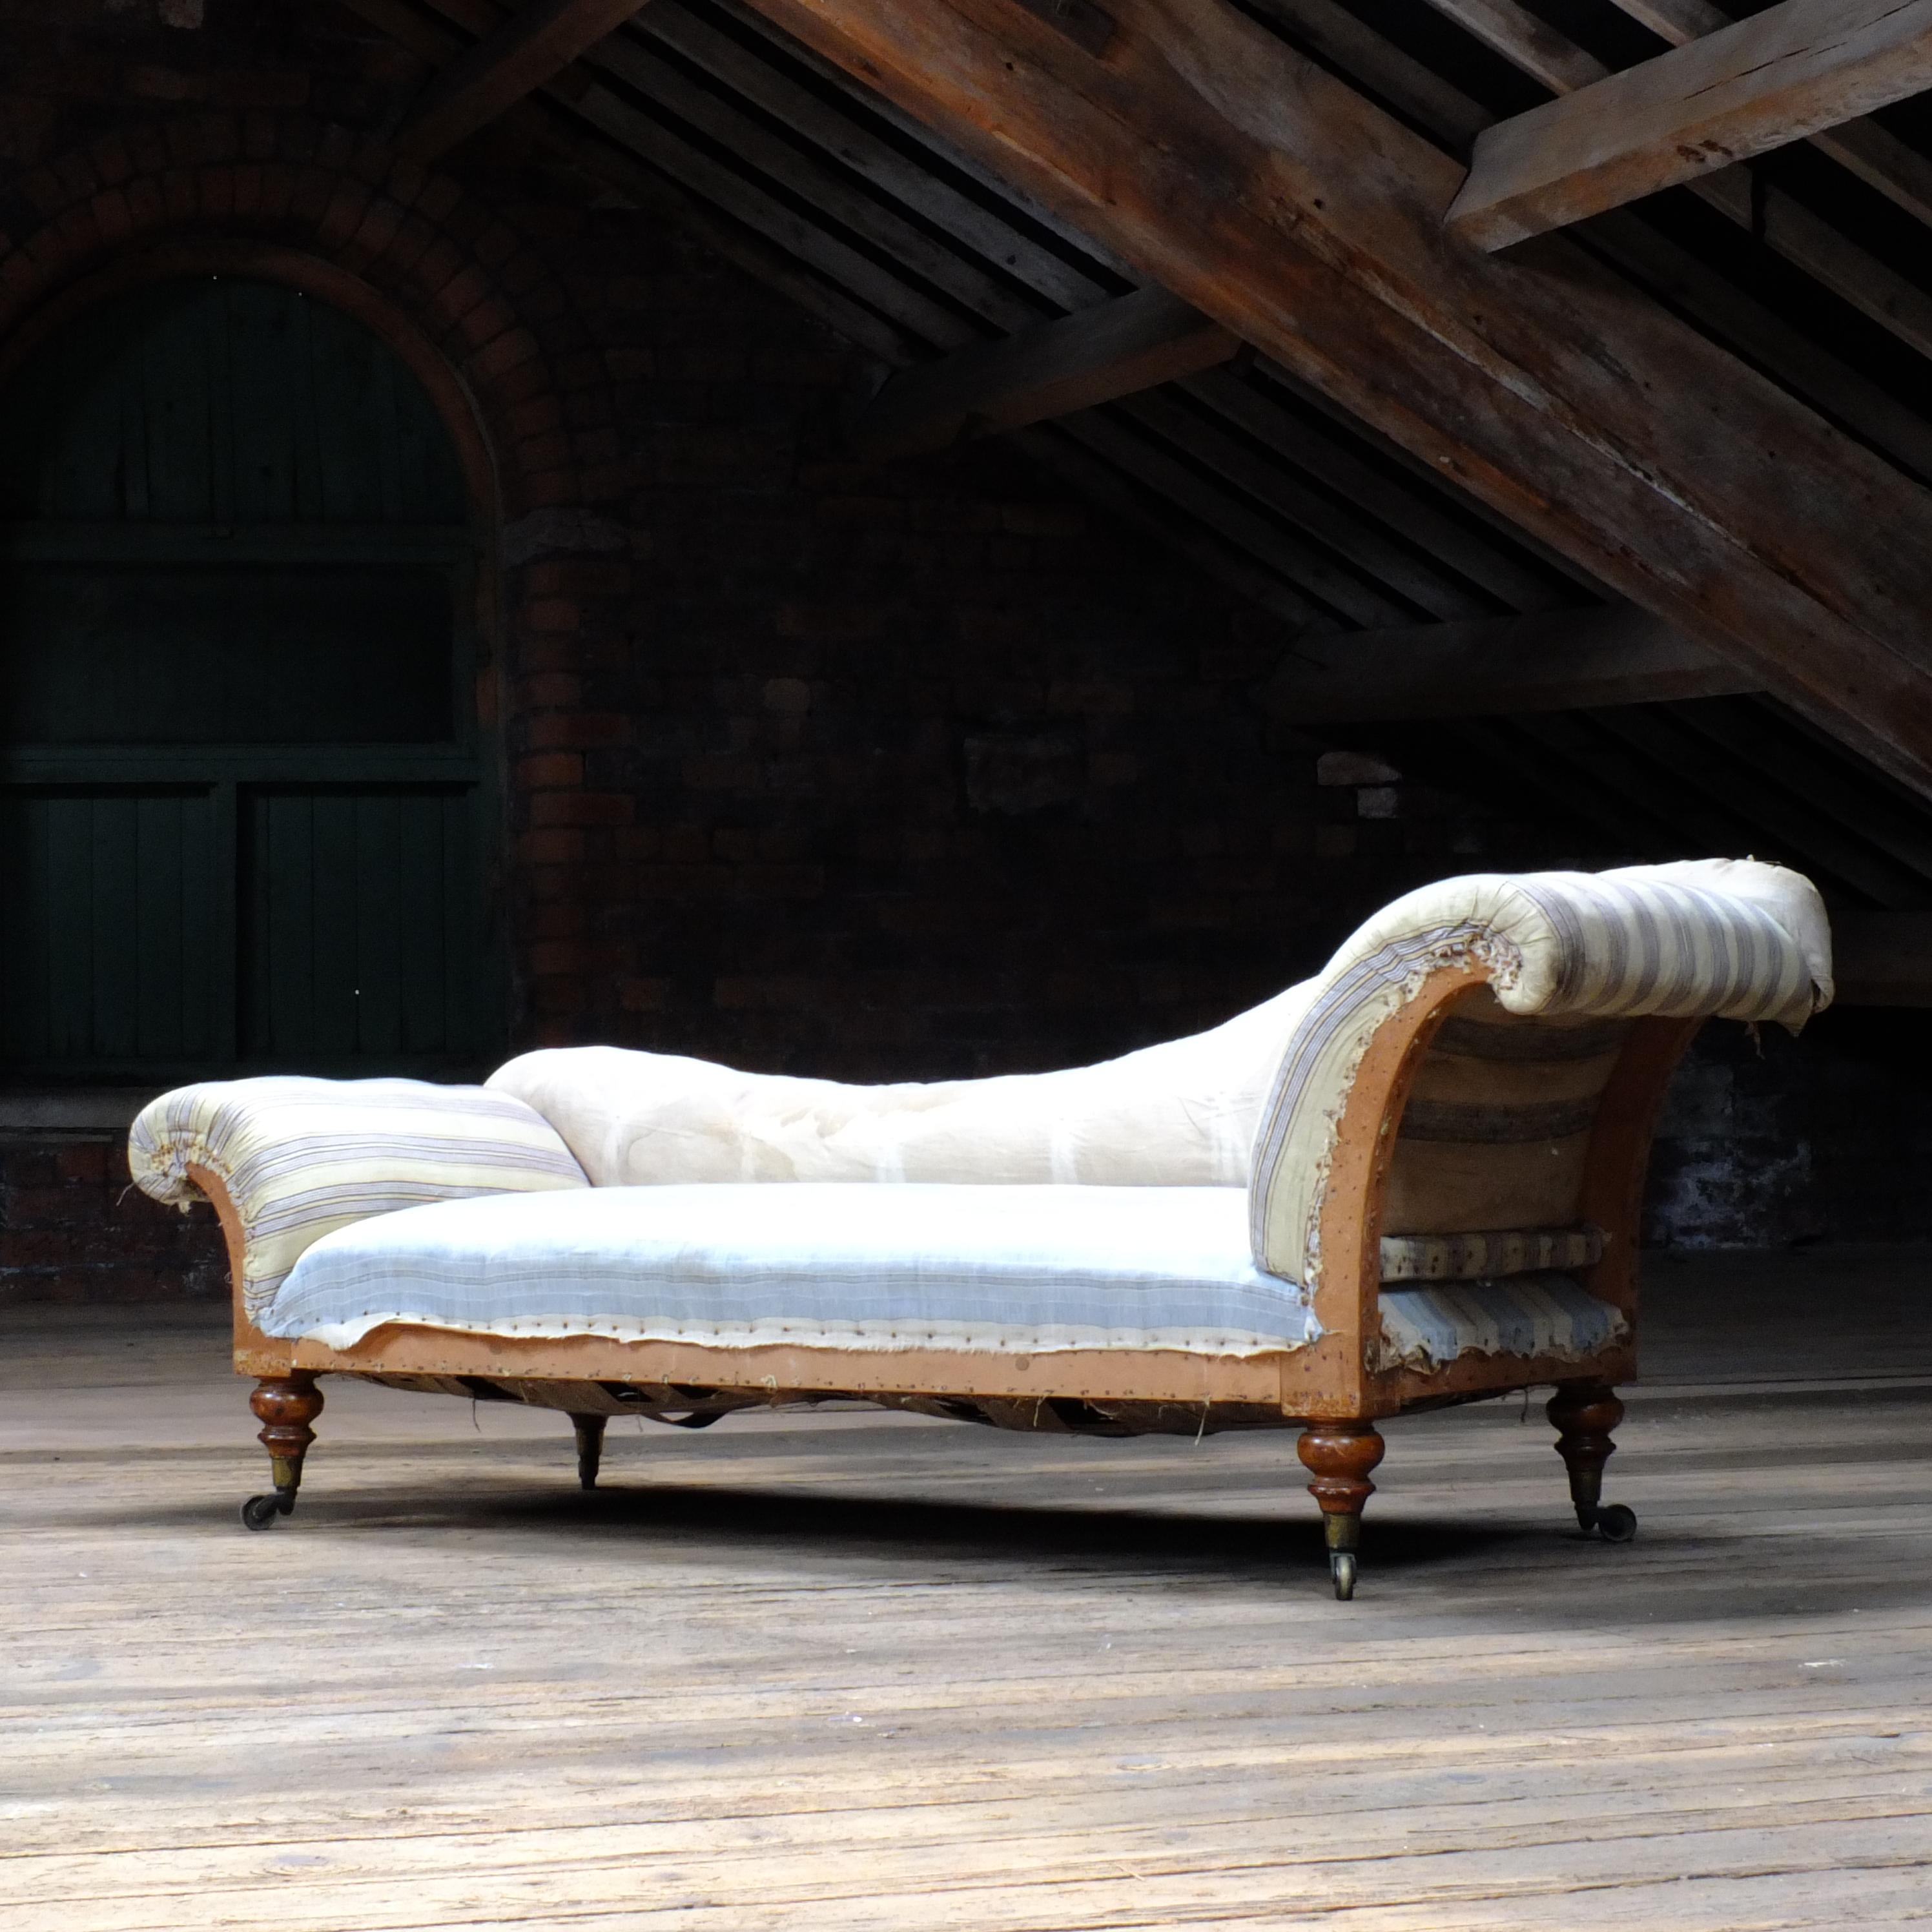 A superb quality Victorian chaise lounge by Charles Hindley & sons of 134 oxford street London. Raised on 4 chunky turned legs with the original brass cup castors. 
The build quality of this piece is reminiscent to that of Howard and son and in